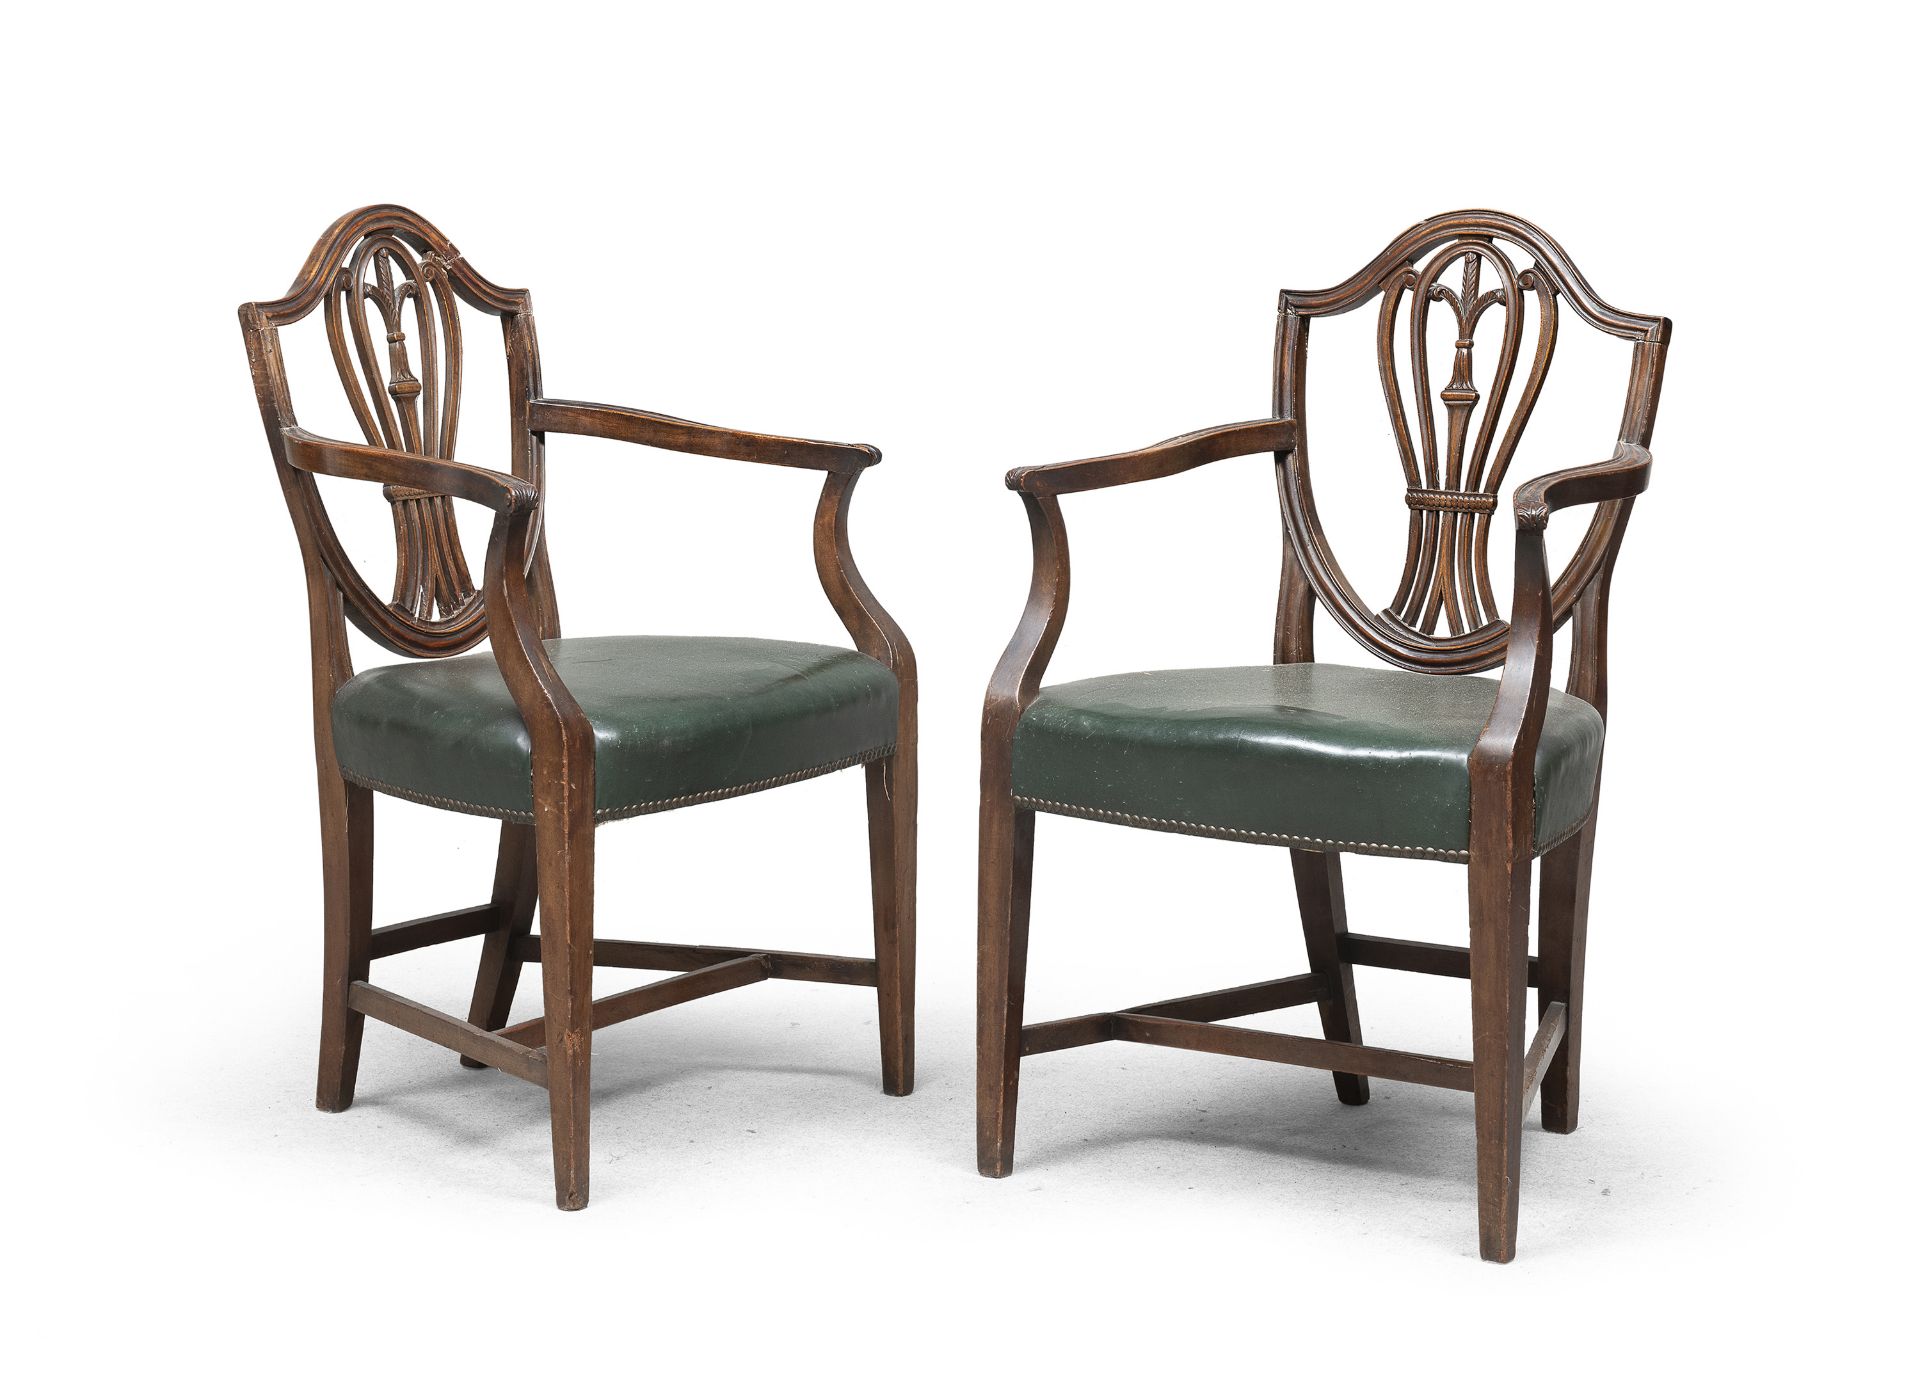 SIX CHAIRS AND TWO MAHOGANY CHAIRS ENGLAND GEORGE III PERIOD - Image 2 of 2